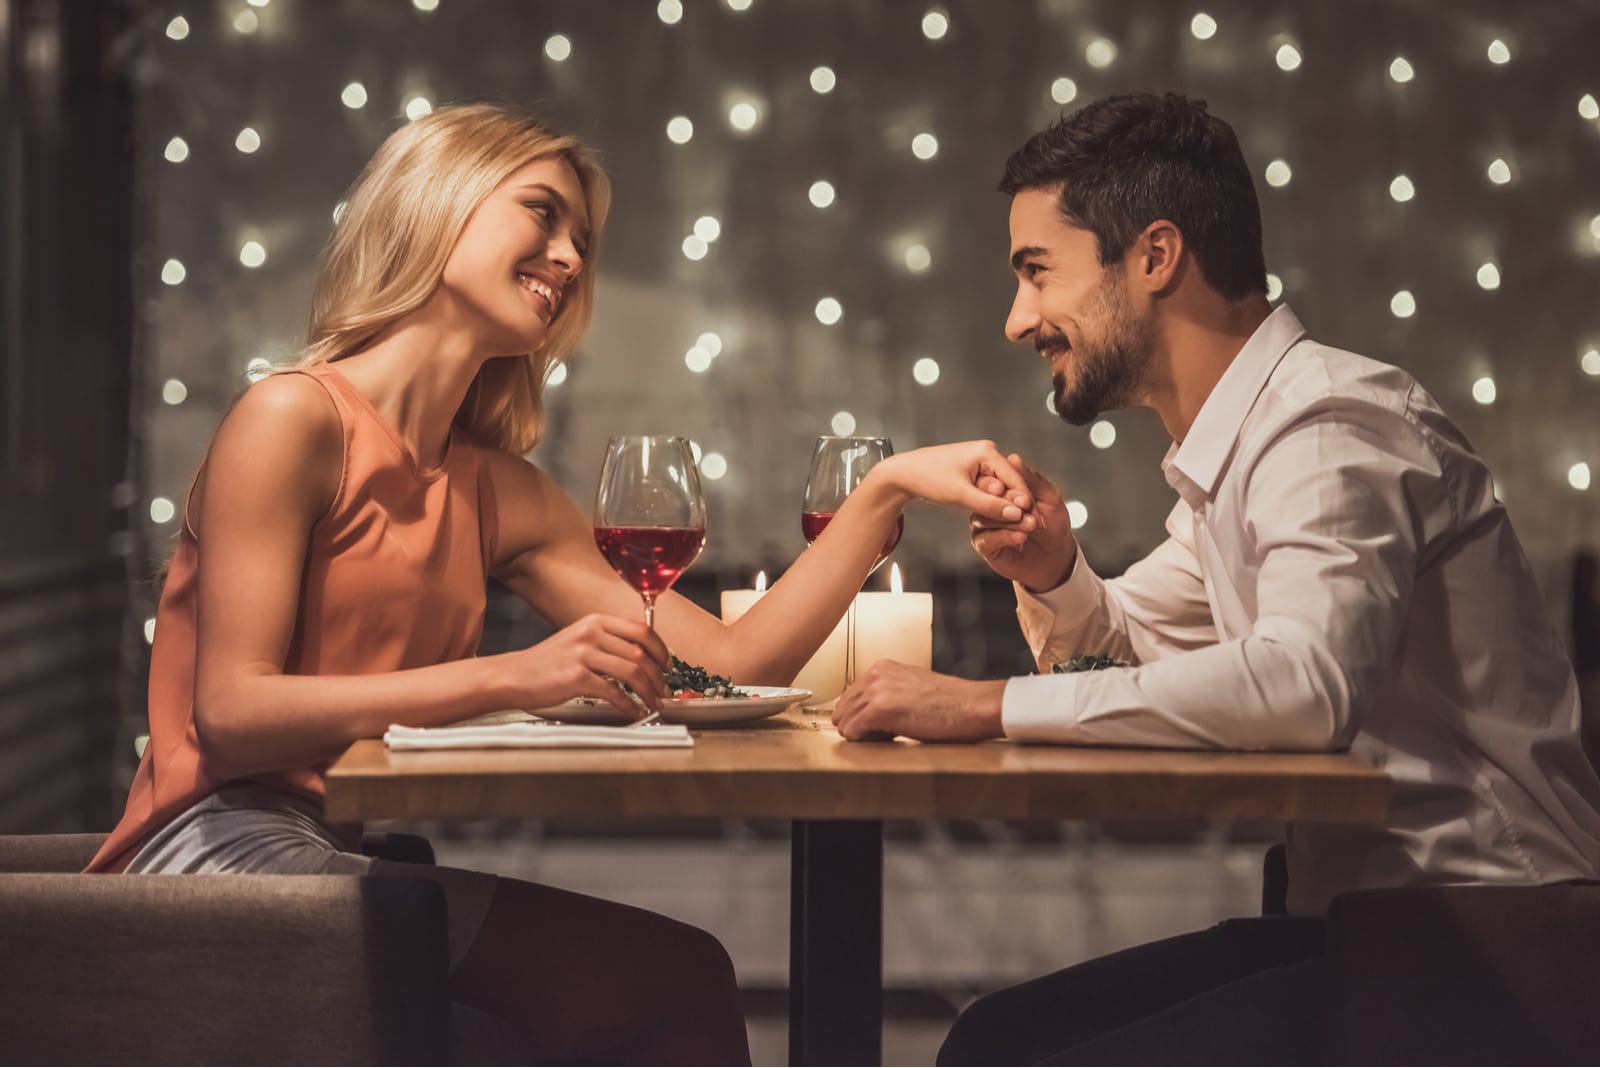 man complimenting woman in restaurant